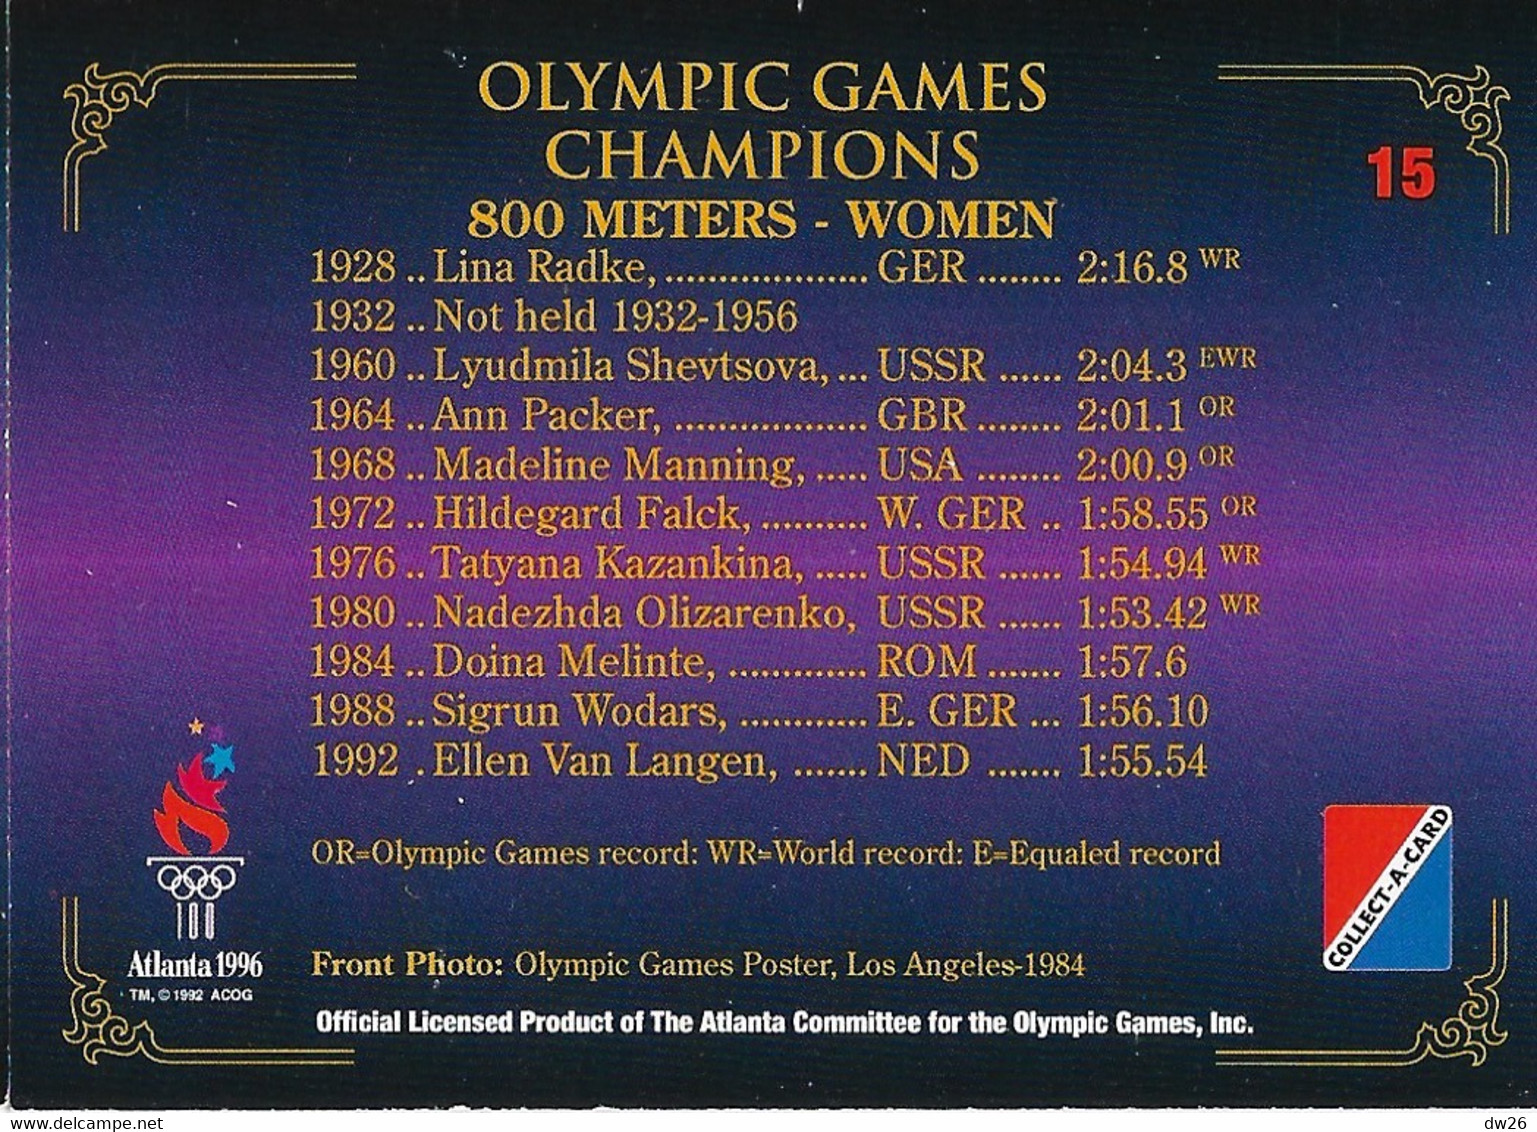 Centennial Olympic Games Atlanta 1996, Collect Card N° 15 - Poster Los Angeles 1984 - Palmarès Champions 800 M Women - Trading Cards